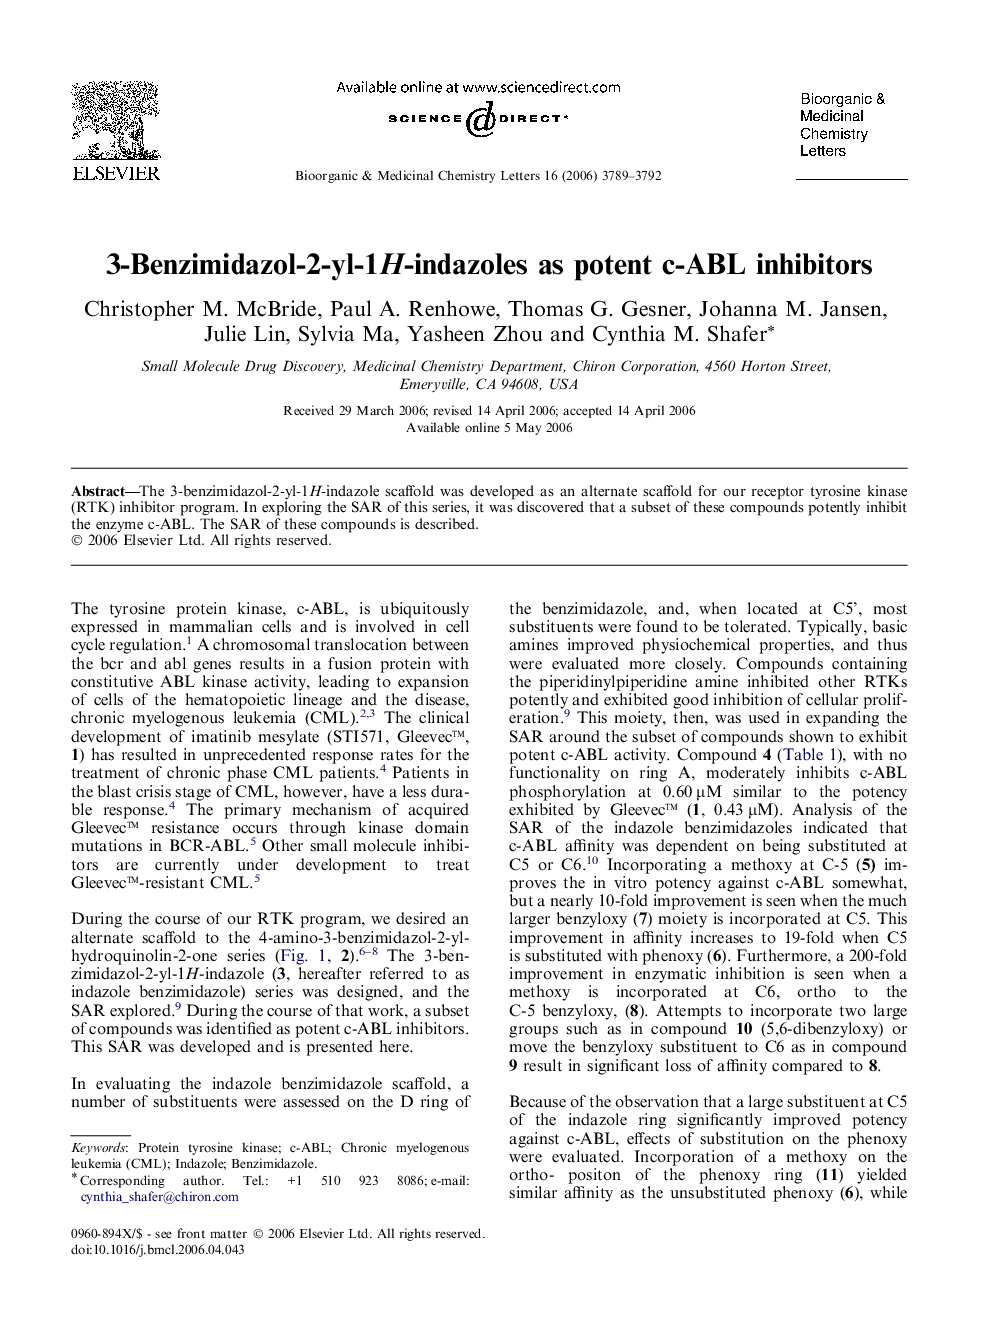 3-Benzimidazol-2-yl-1H-indazoles as potent c-ABL inhibitors